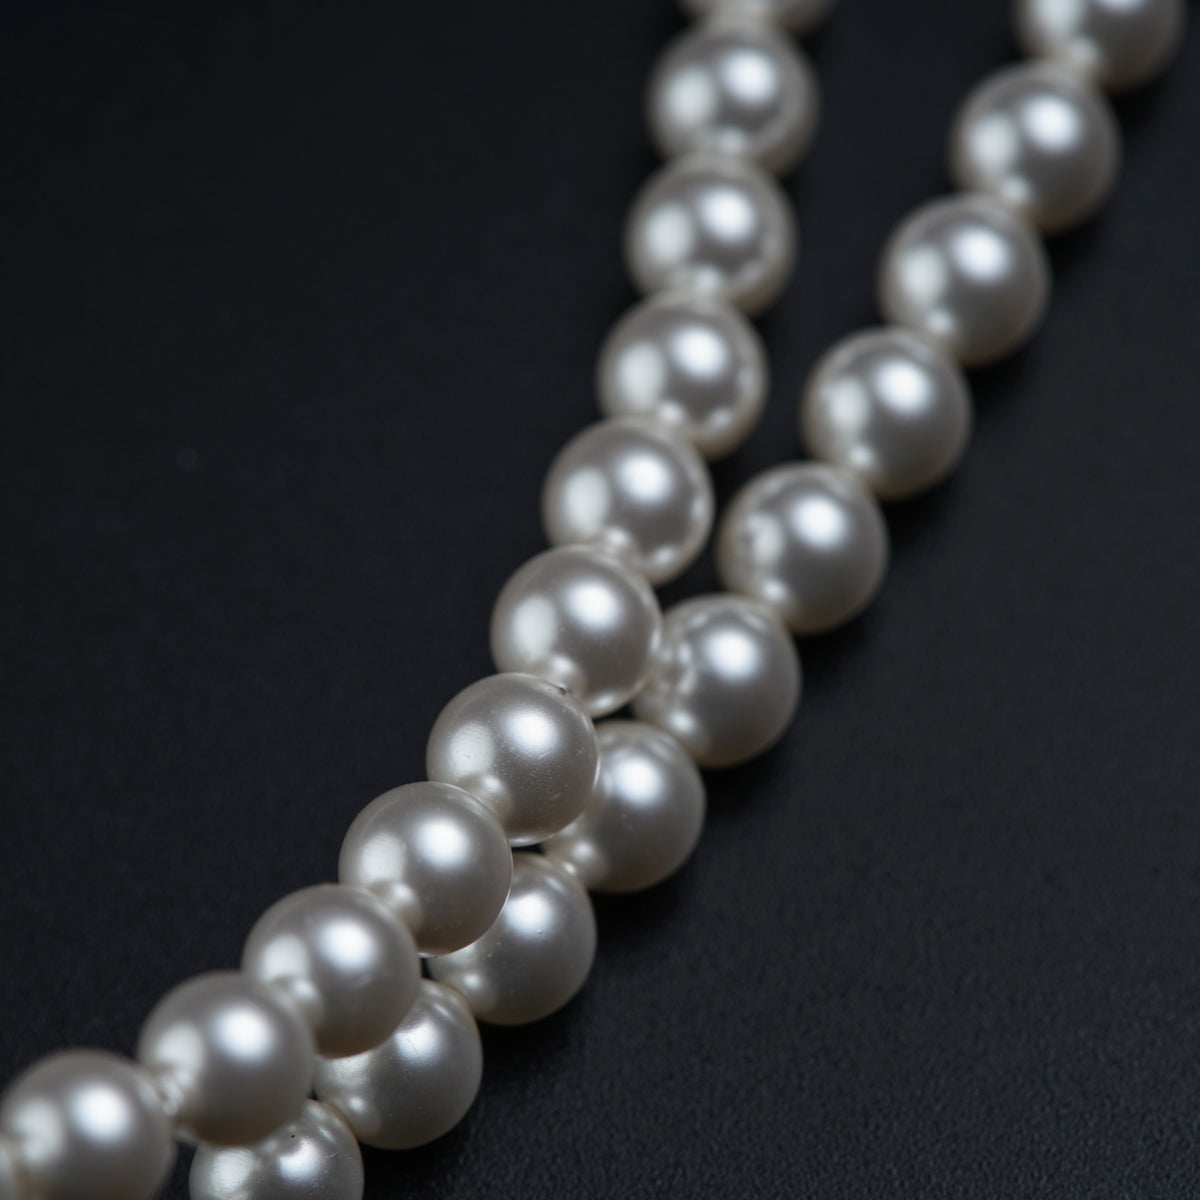 a long strand of white pearls on a black surface